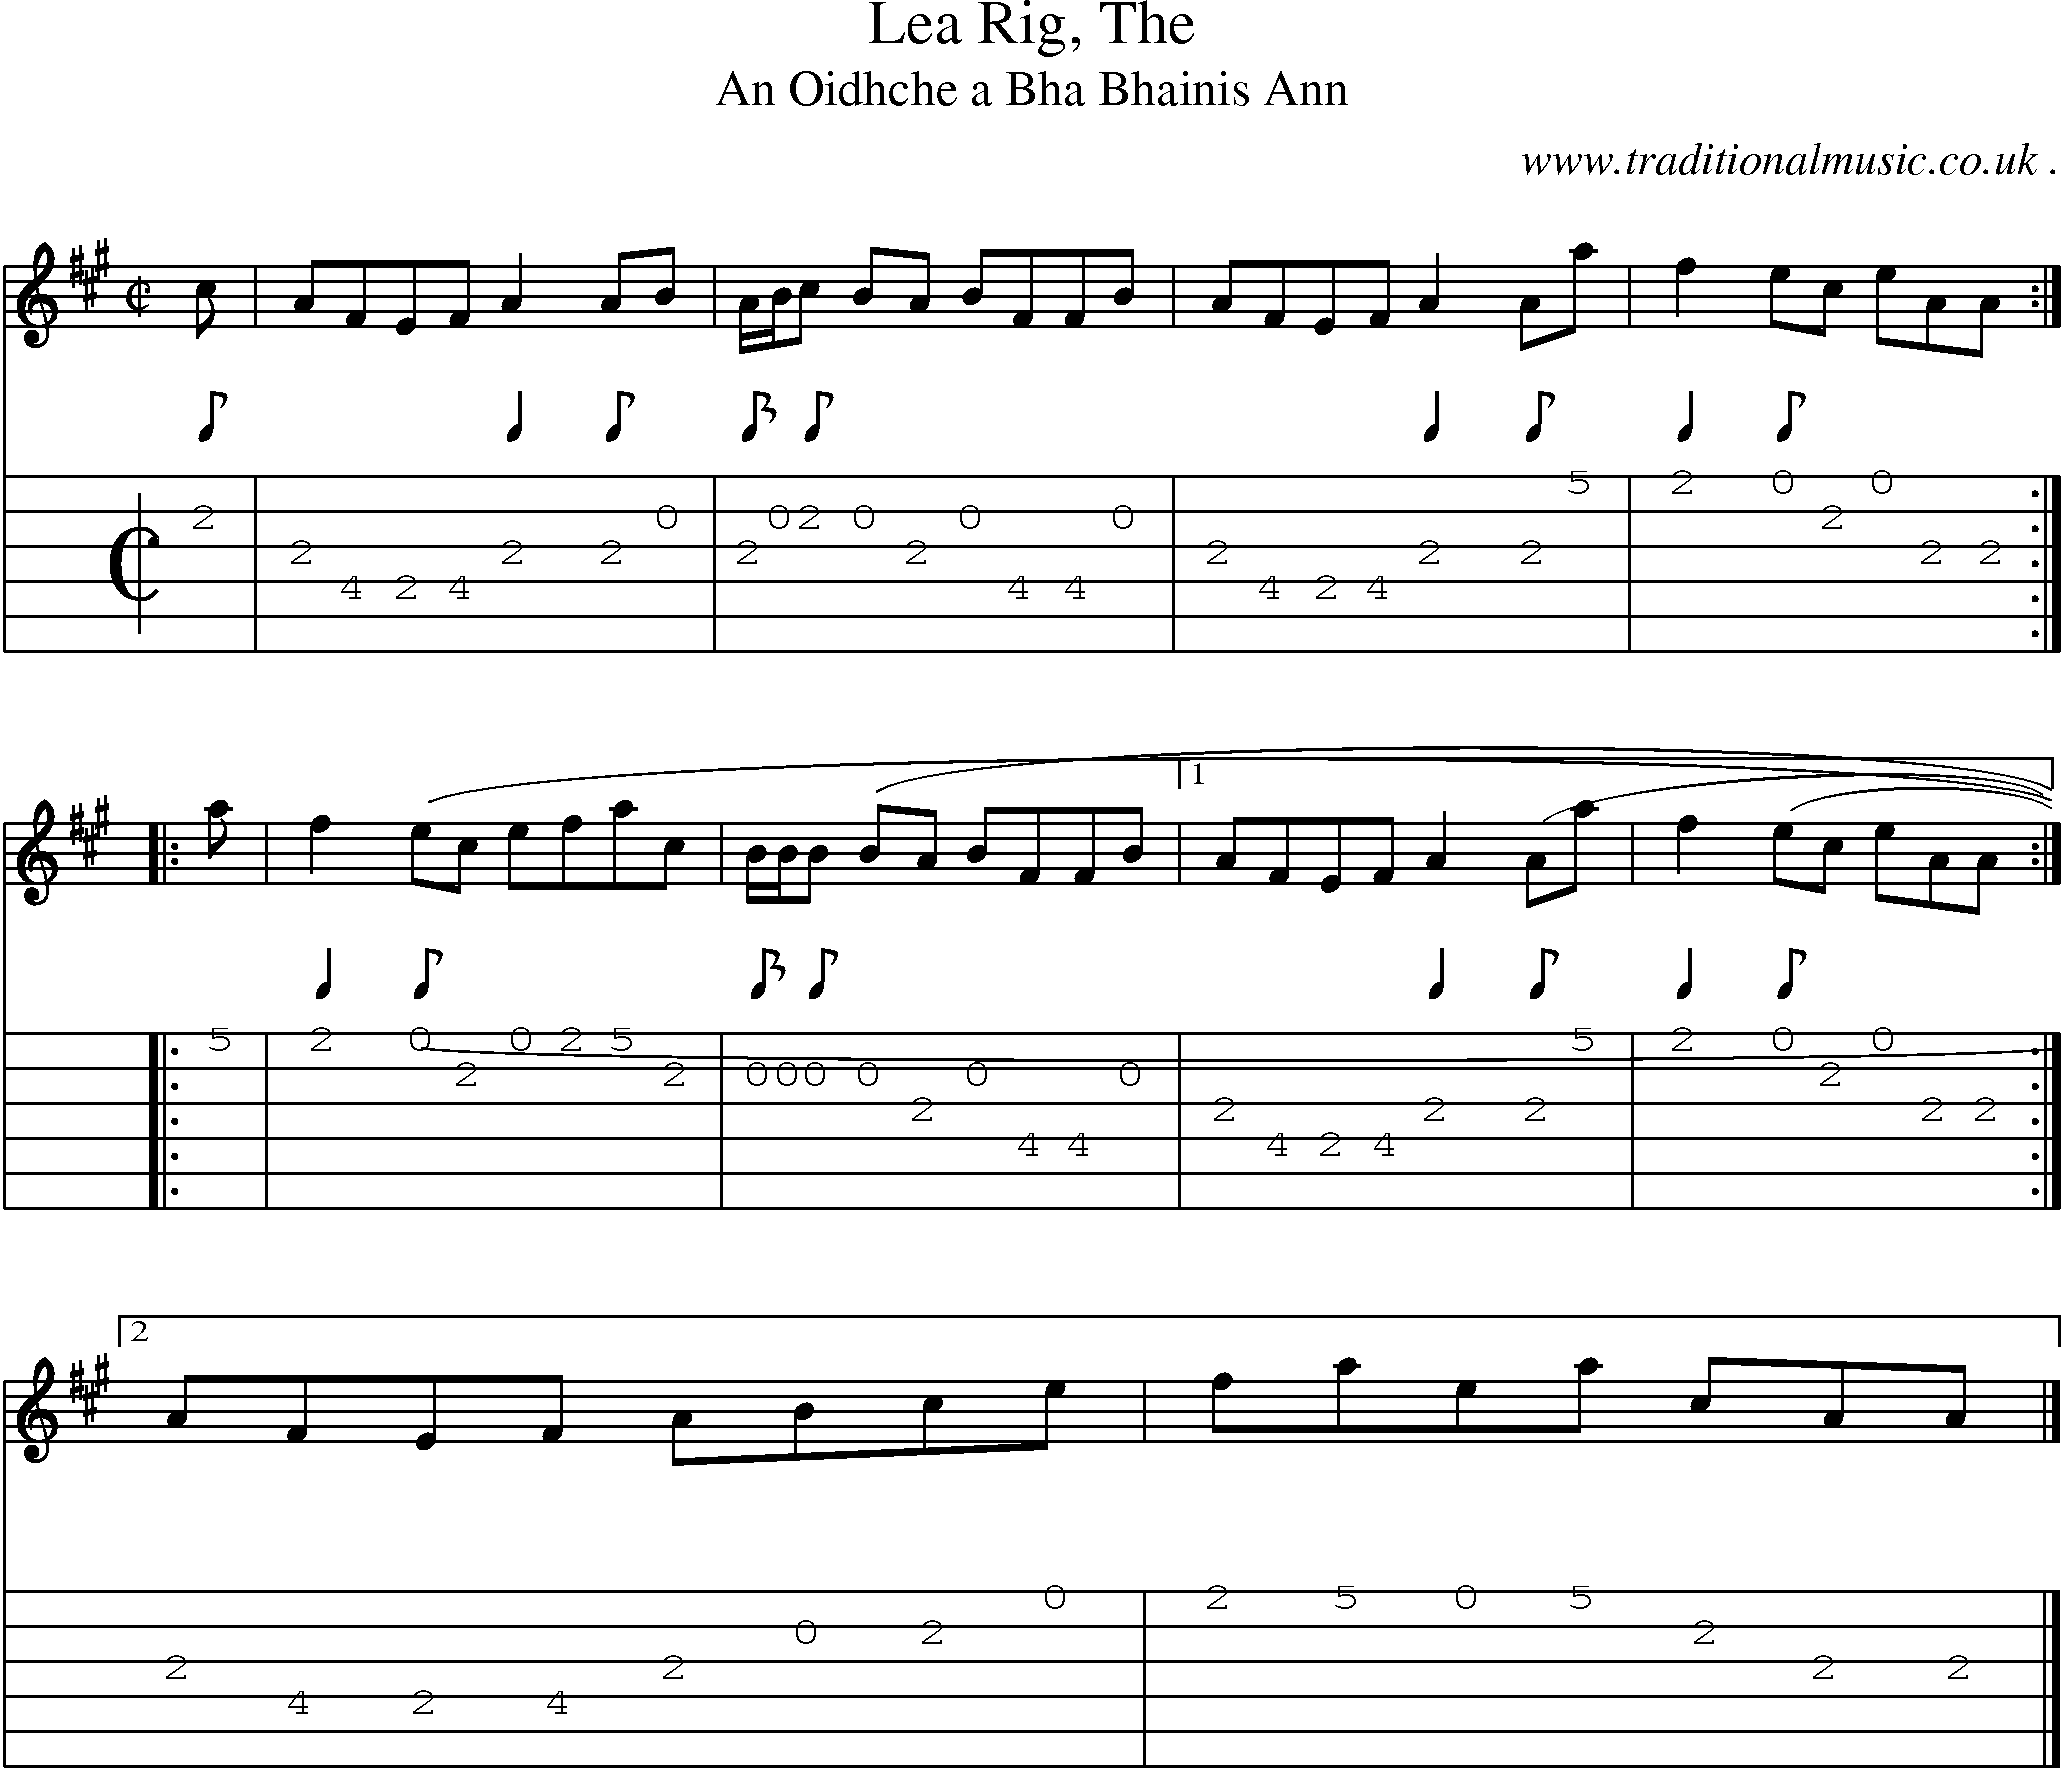 Sheet-music  score, Chords and Guitar Tabs for Lea Rig The